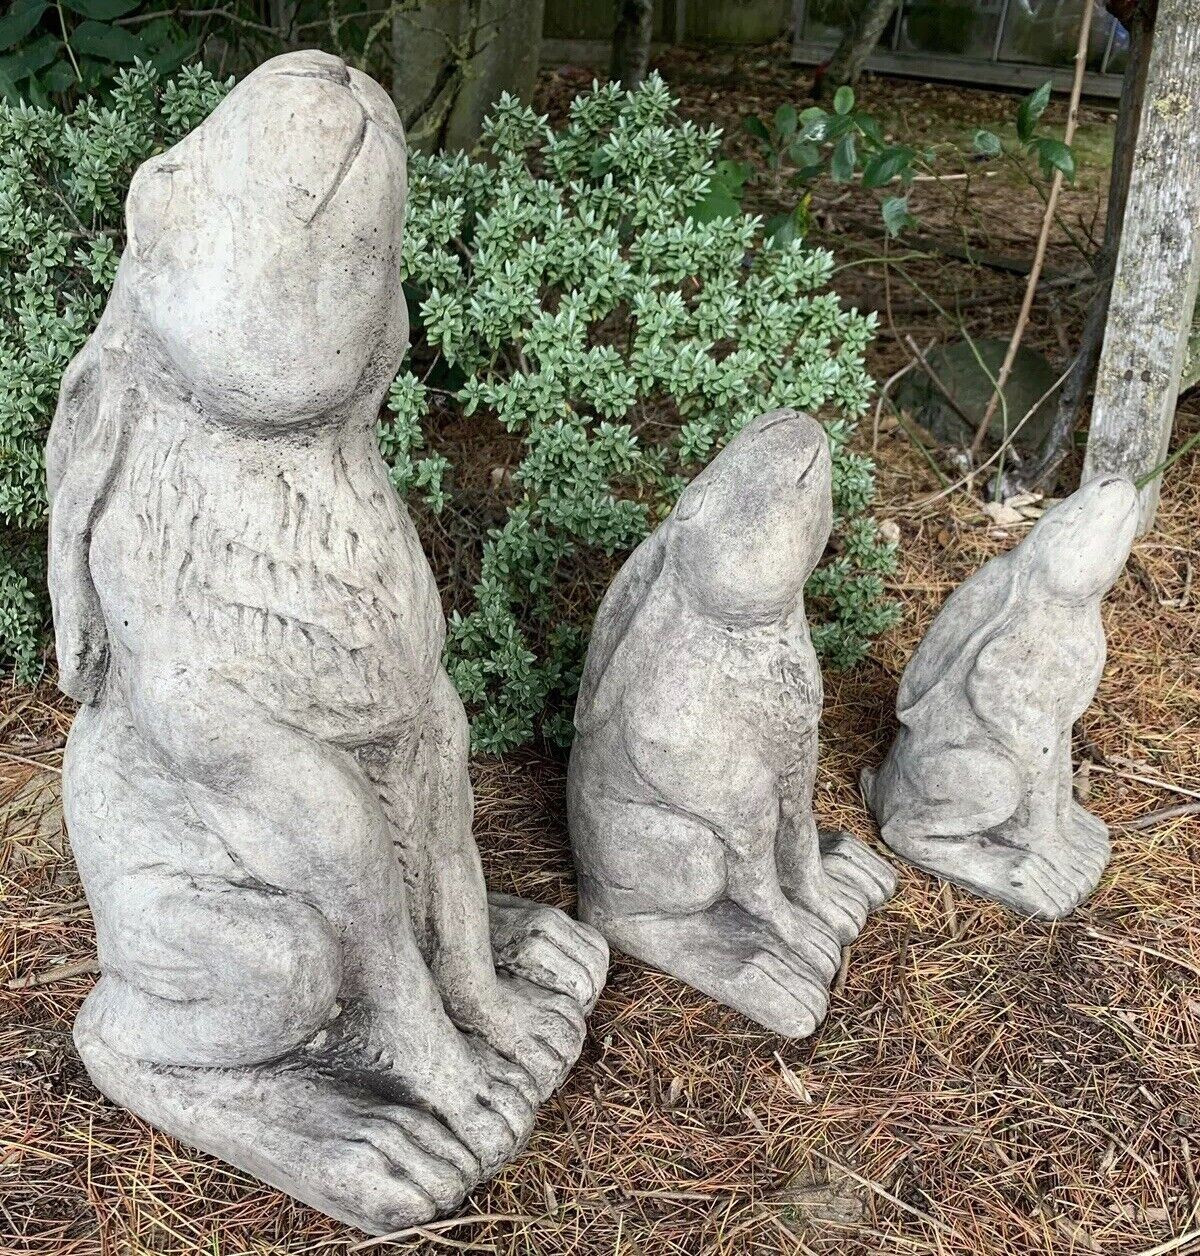 STONE GARDEN FAMILY FULL SET OF RUSTIC MOON GAZING HARE ORNAMENTS